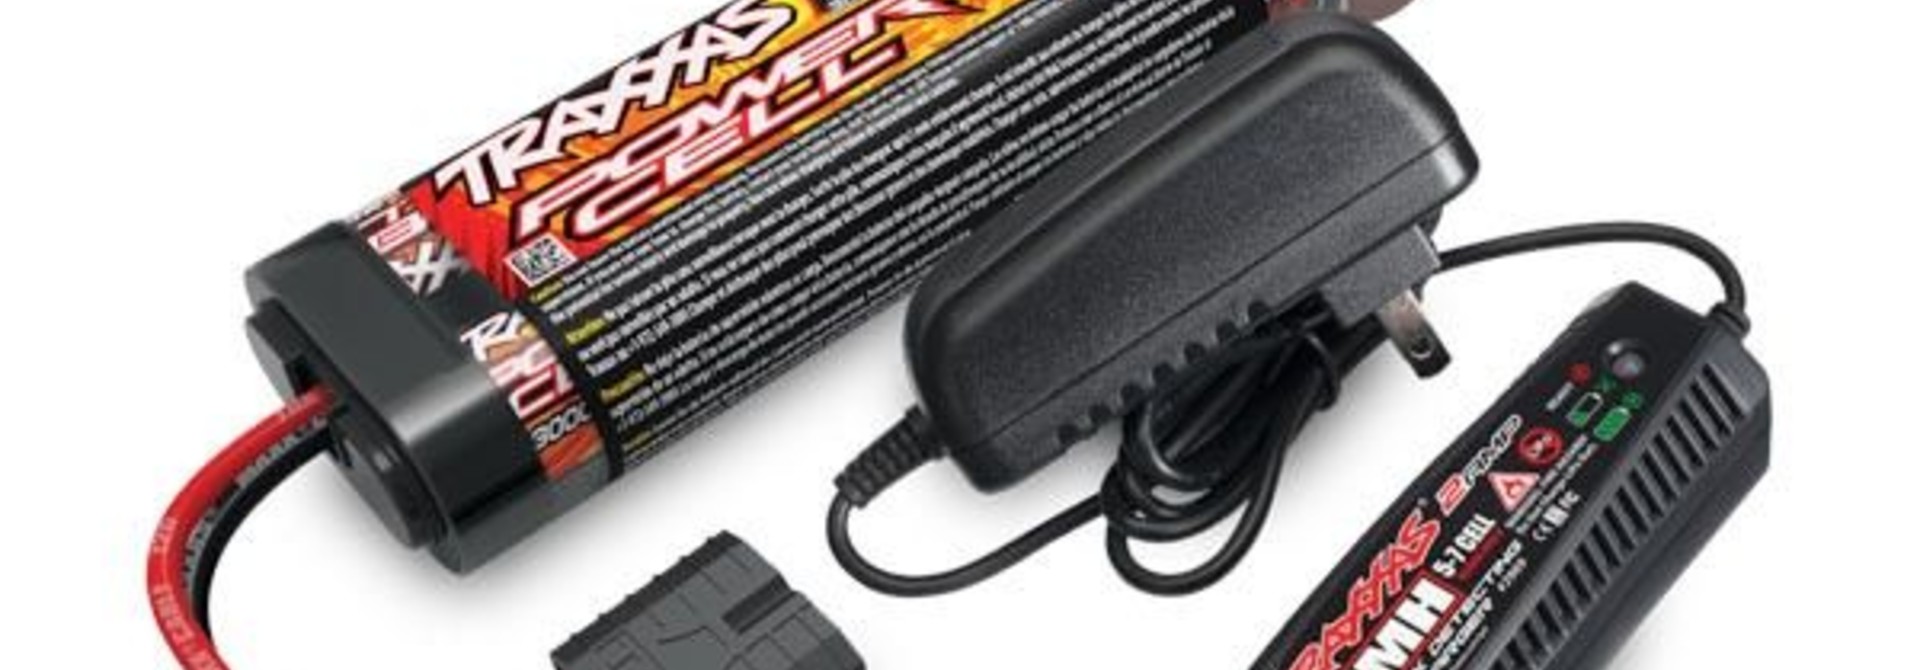 TRAXXAS BATTERY/CHARGER COMPLETER PACK 2969 CHARGER AND 2923X BATTERY (TRX2983G)